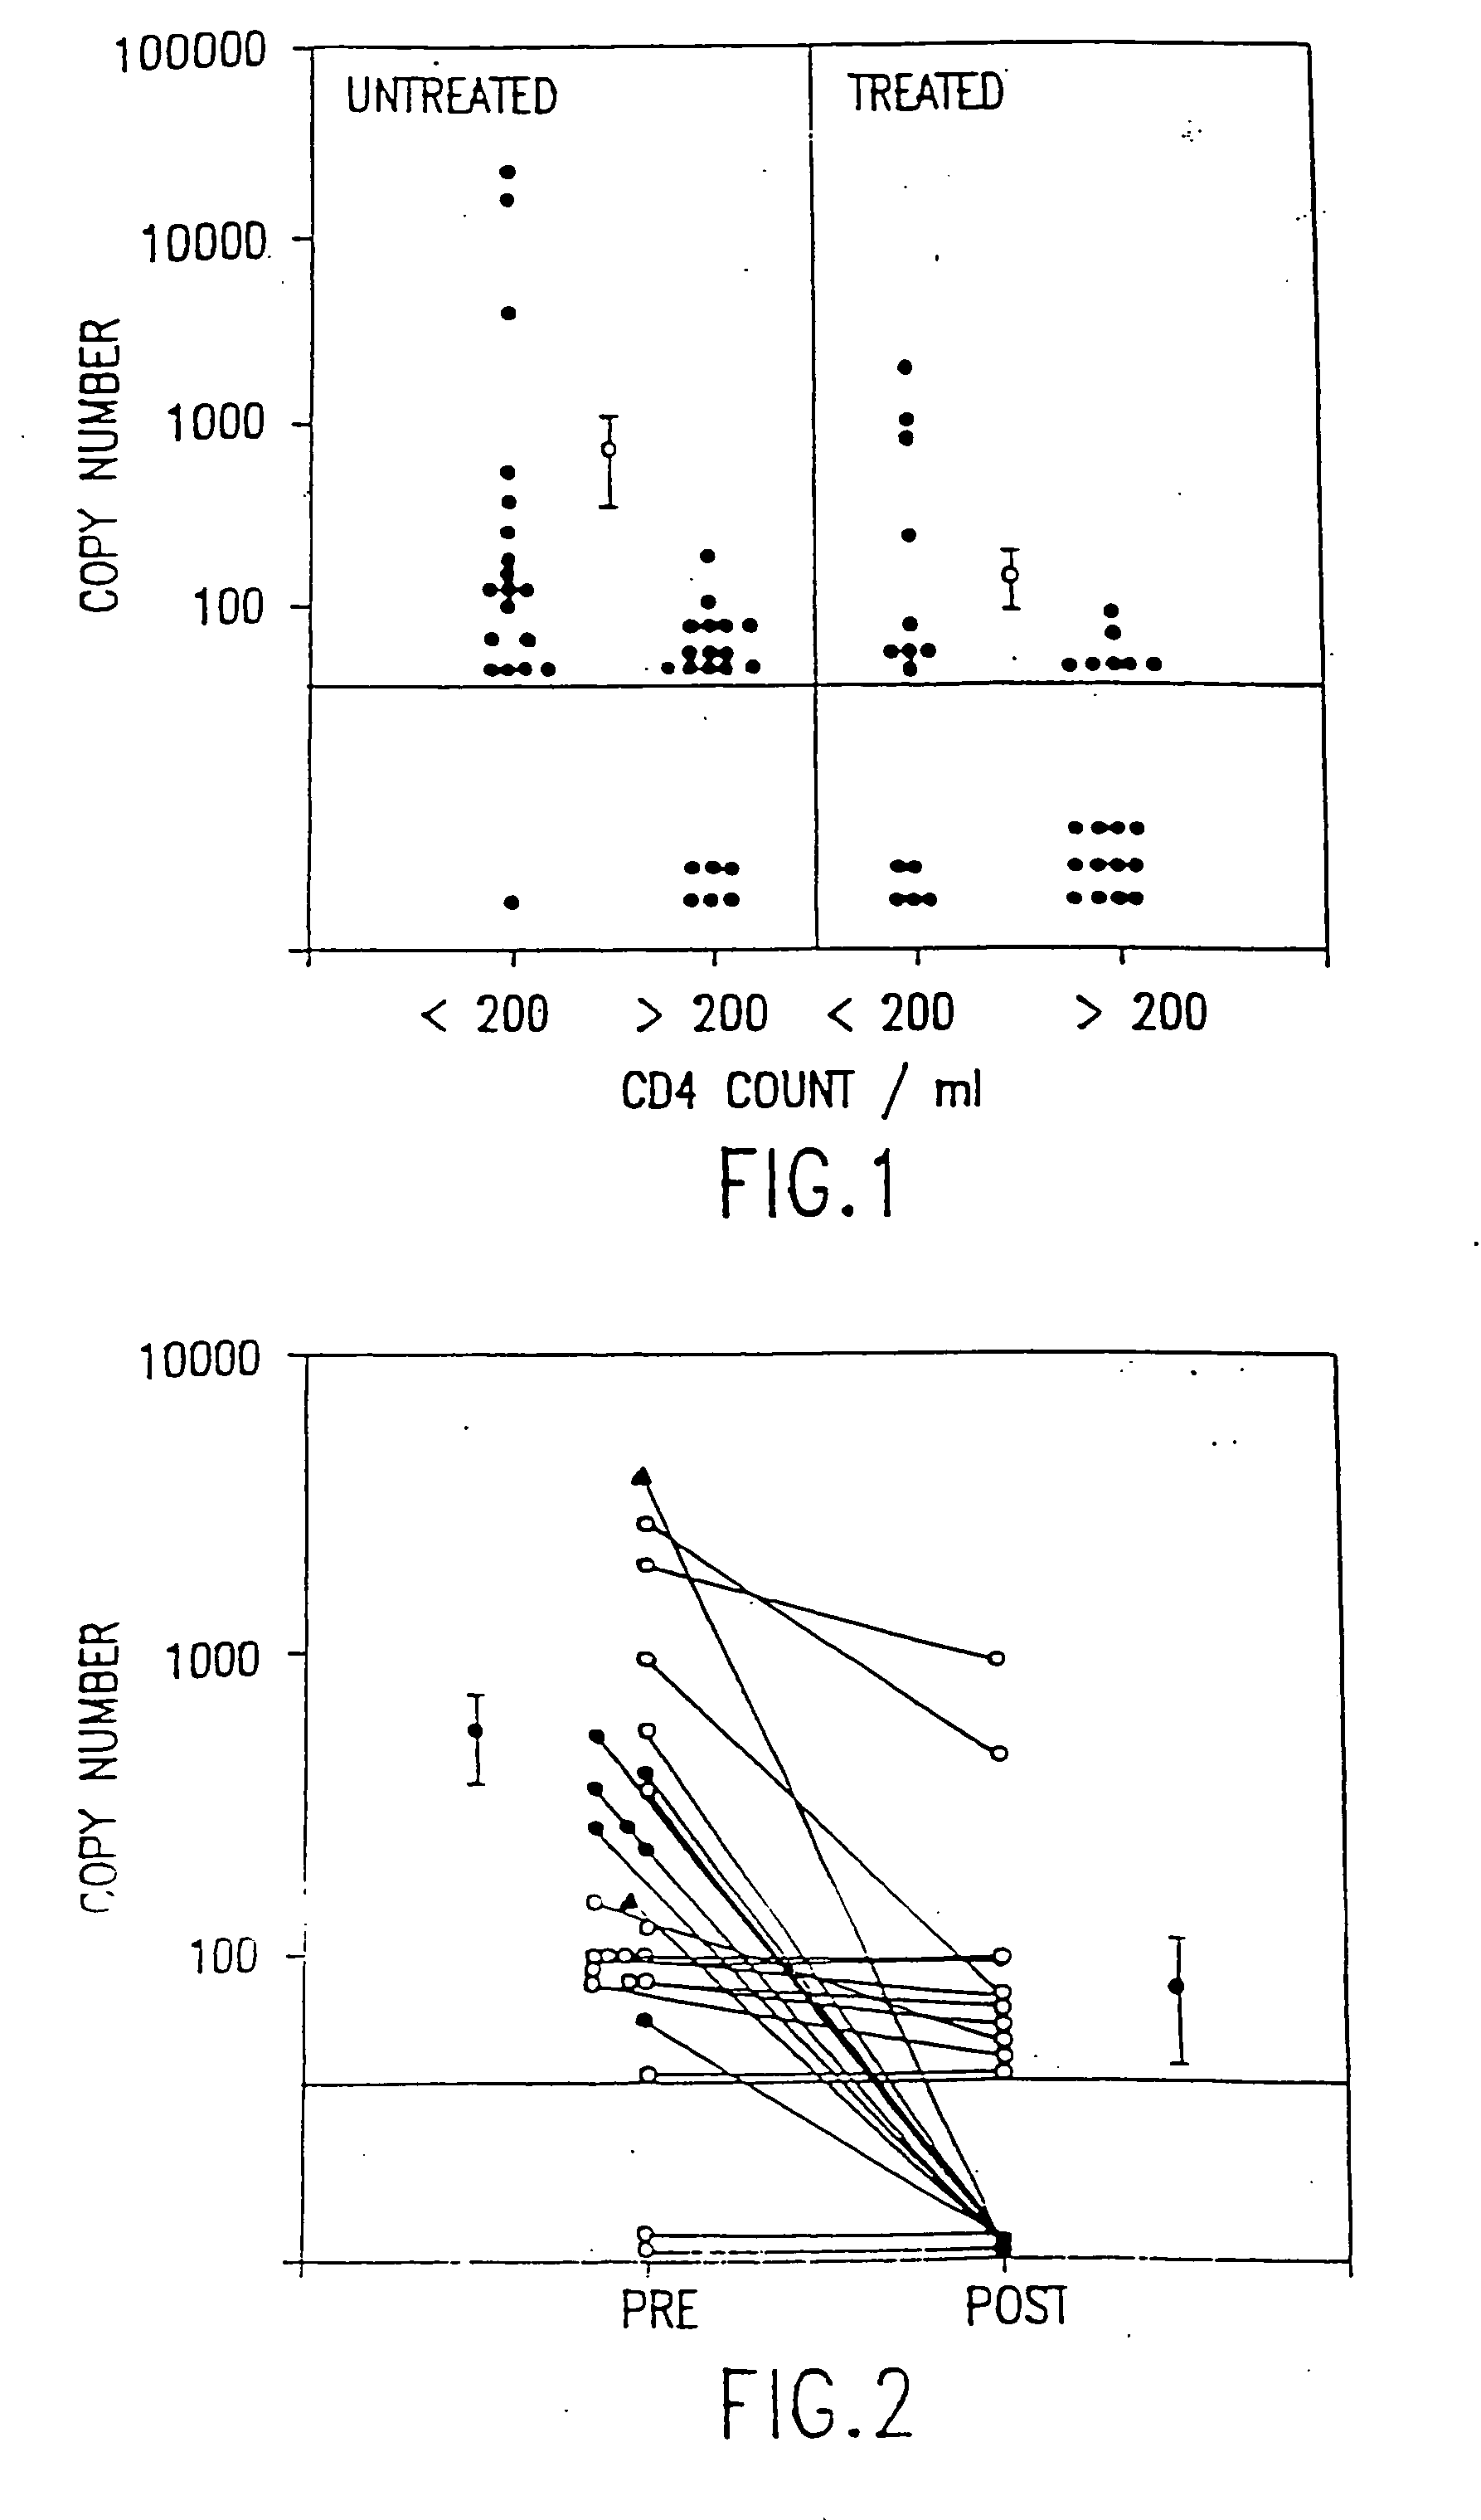 Polymerase chain reaction assays for monitoring antiviral therapy and making therapeutic decisions in the treatment of acouired immunodeficiency syndrome